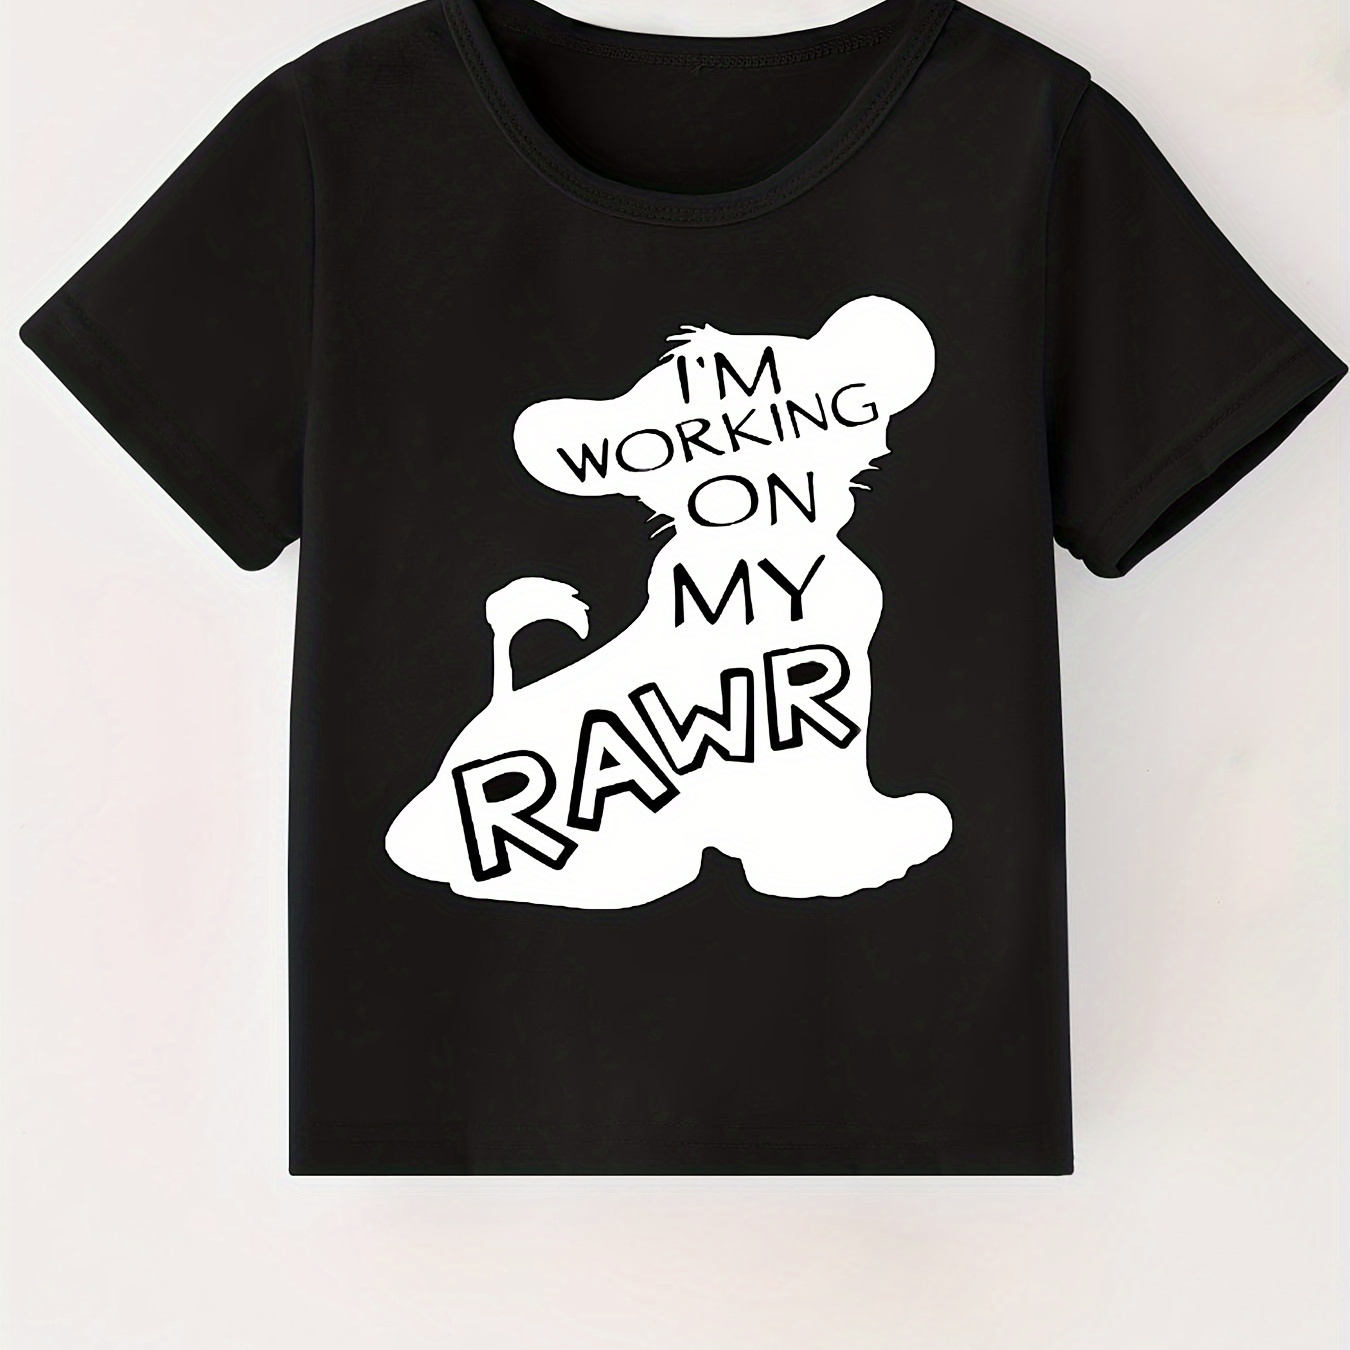 

I'm Working On My Rawr Letter And Animal Print Boys Creative T-shirt, Casual Lightweight Comfy Short Sleeve Tee Tops, Kids Clothings For Summer